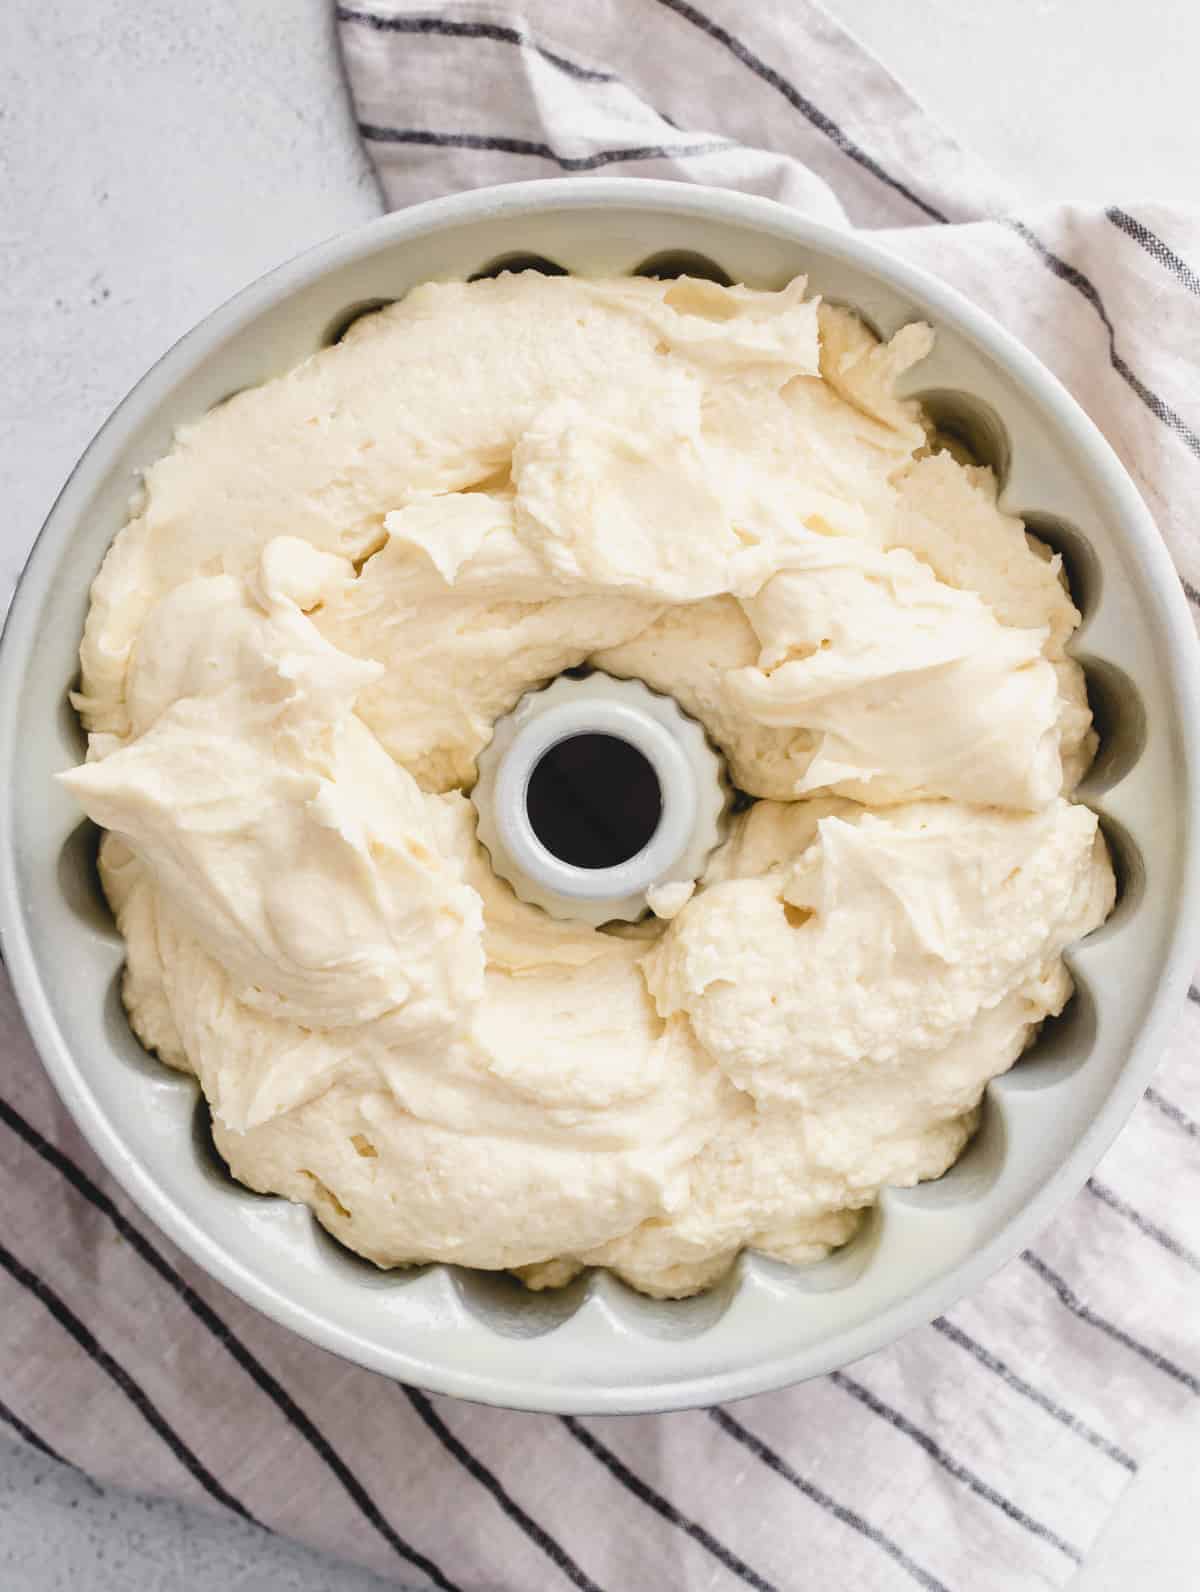 Batter for 7up pound cake in a bundt cake pan